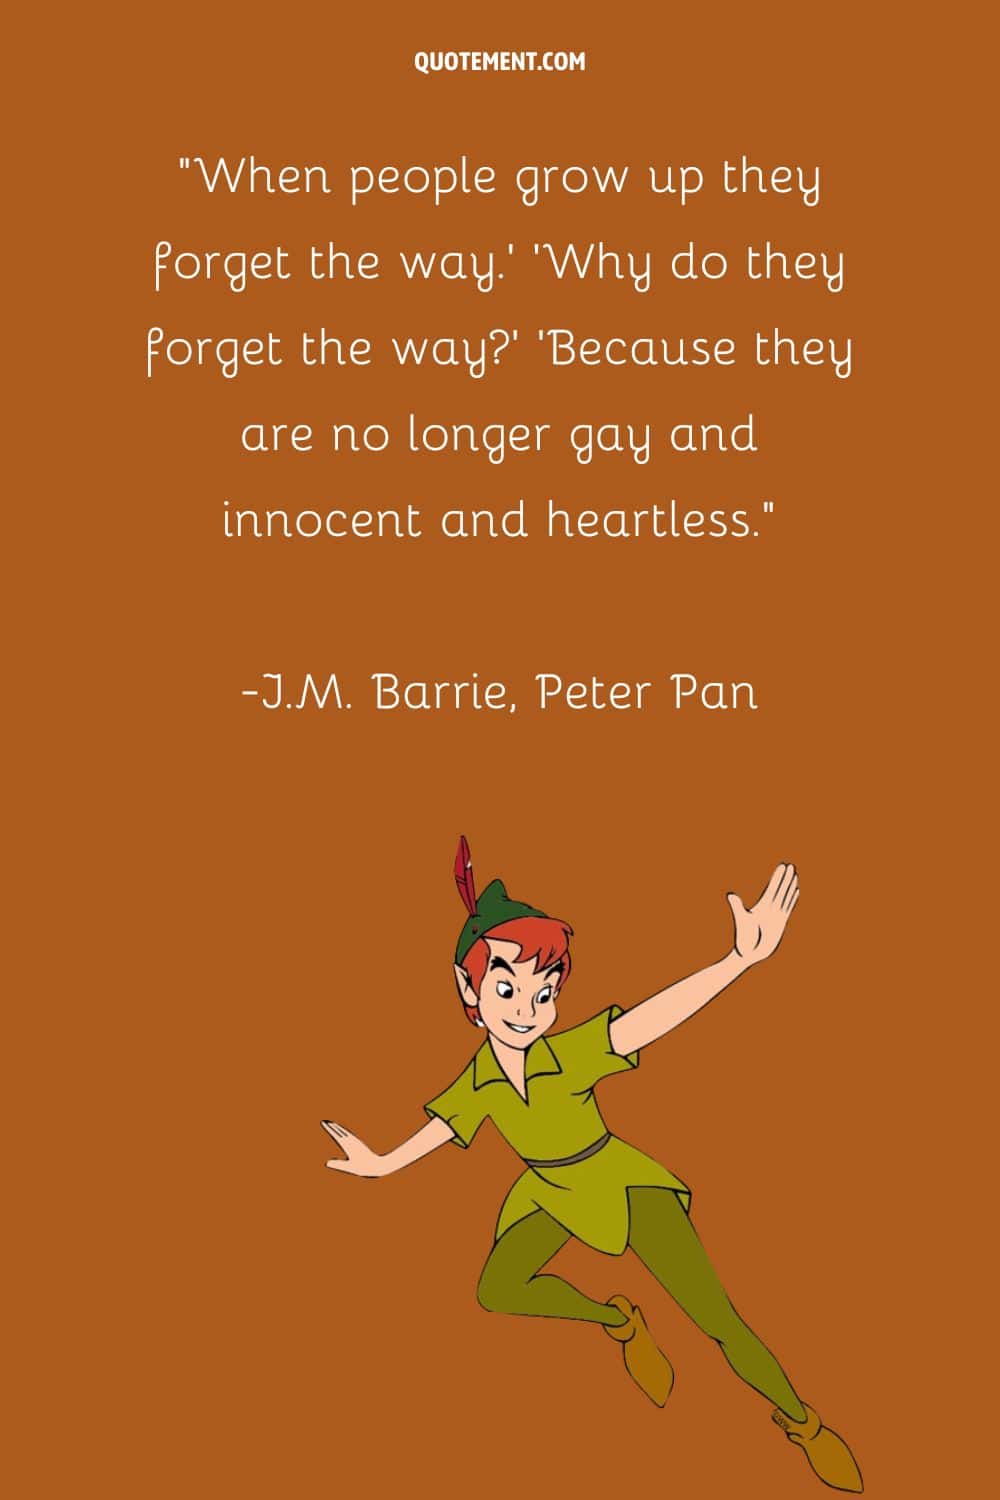 “When people grow up they forget the way.' 'Why do they forget the way' 'Because they are no longer gay and innocent and heartless.” ― J.M. Barrie, Peter Pan